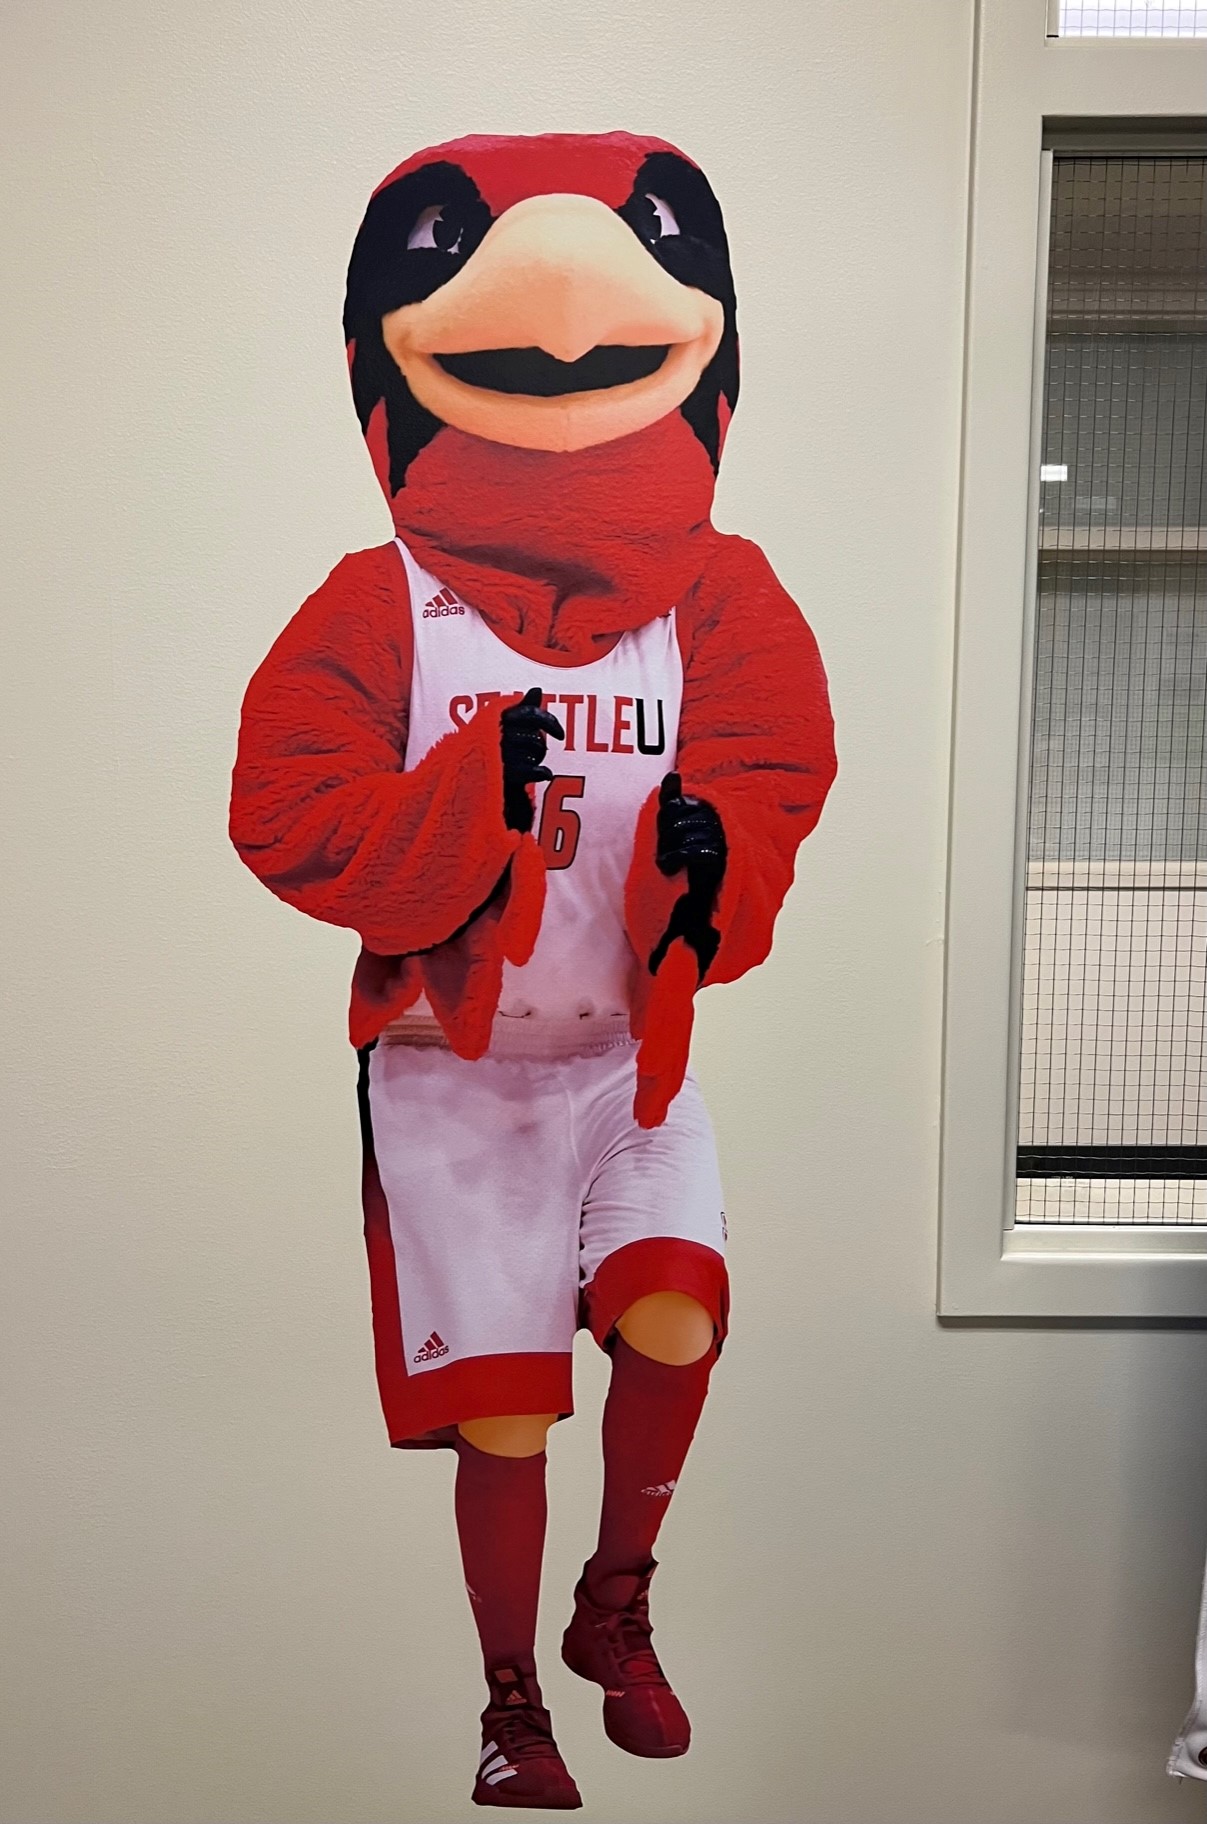 Rudy the Redhawk Wall Graphic